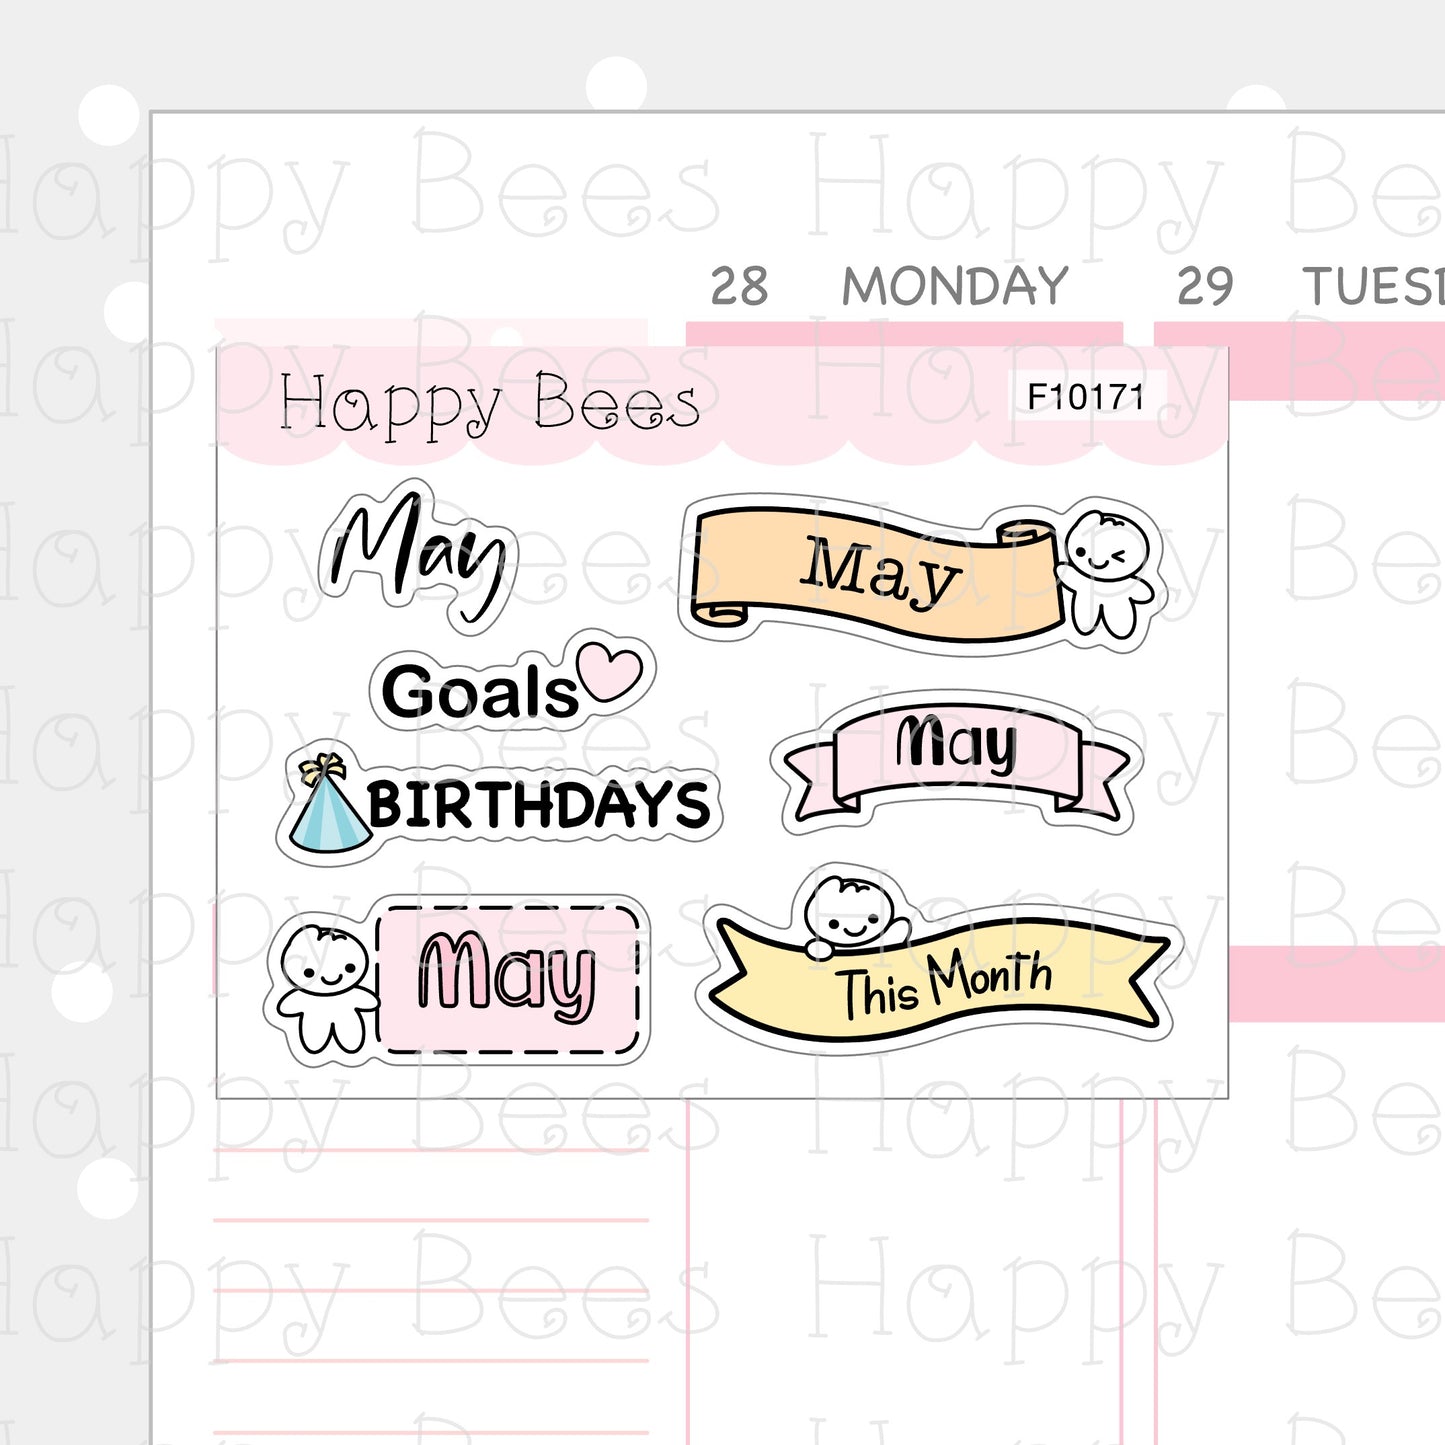 Monthly Journal Stickers - January to June - Cute Doodles Planner Stickers F10171